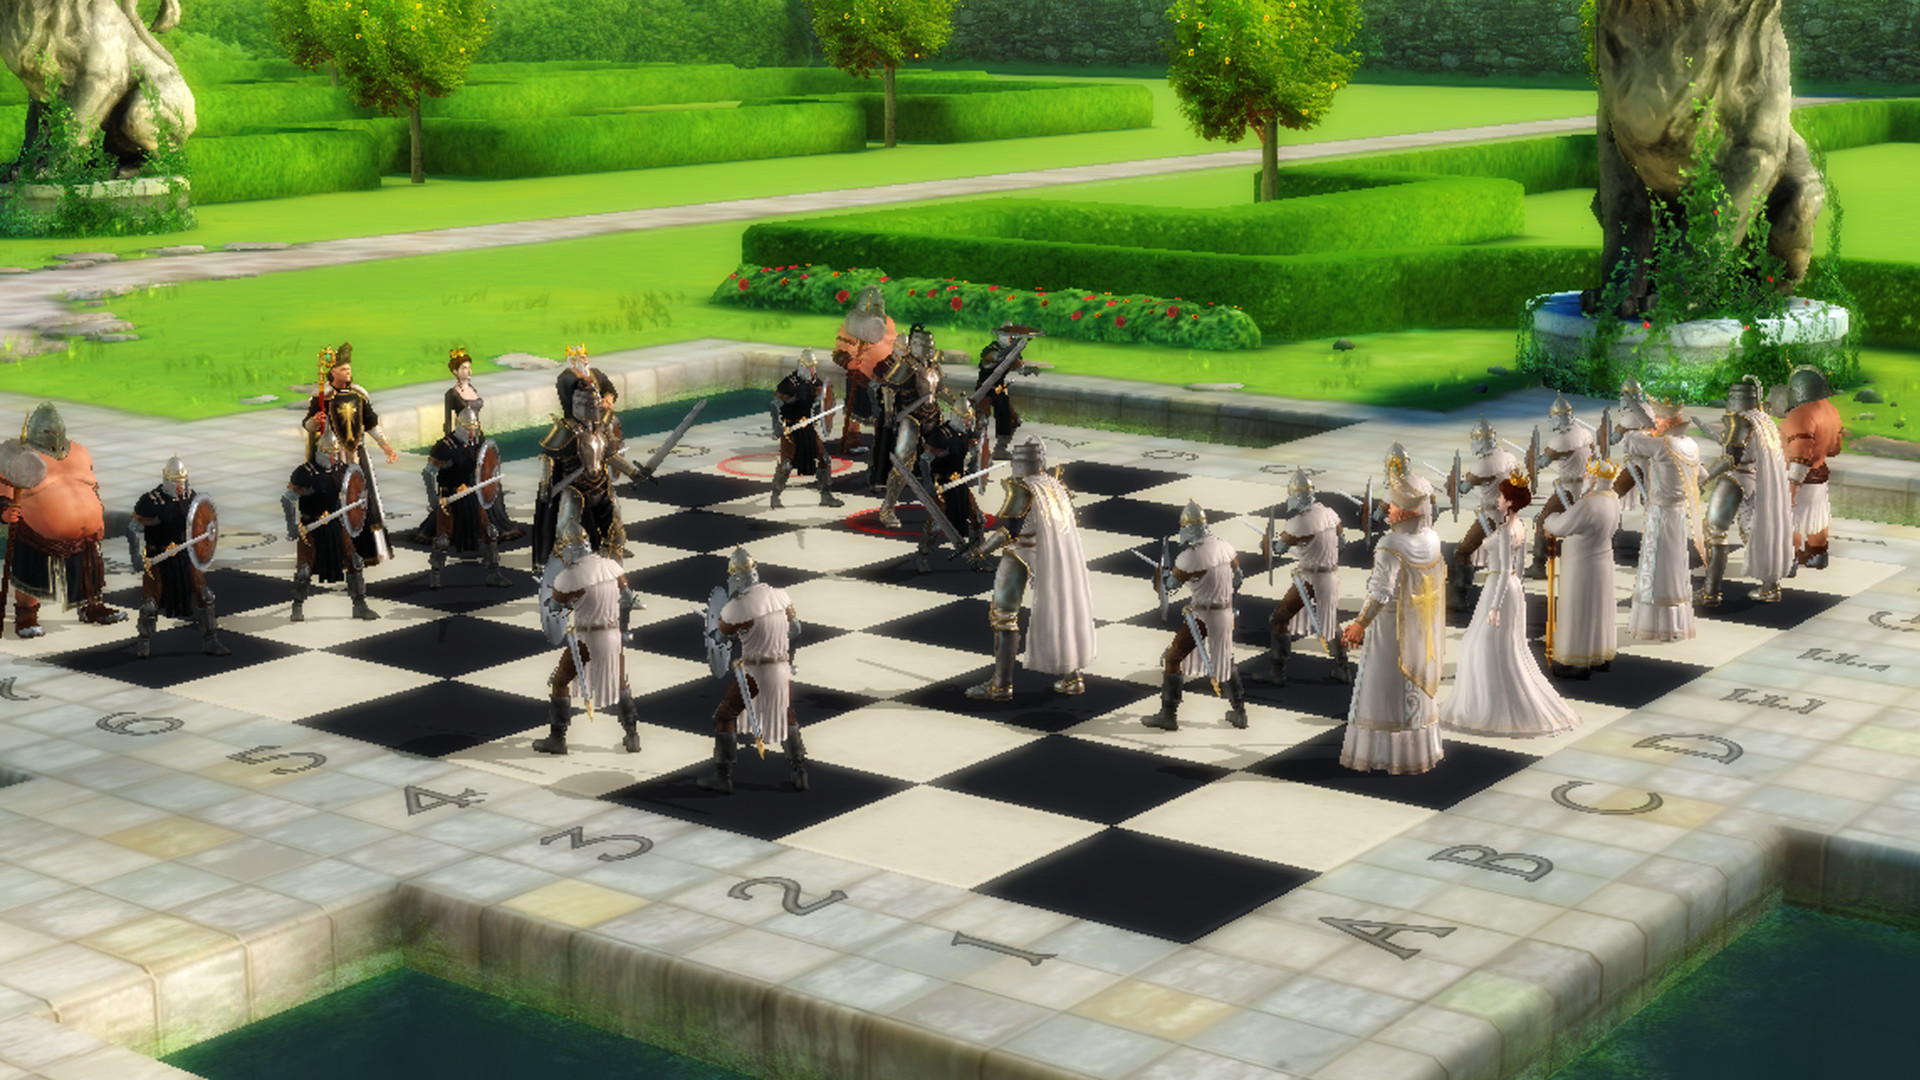 Battle Chess  Play game online!